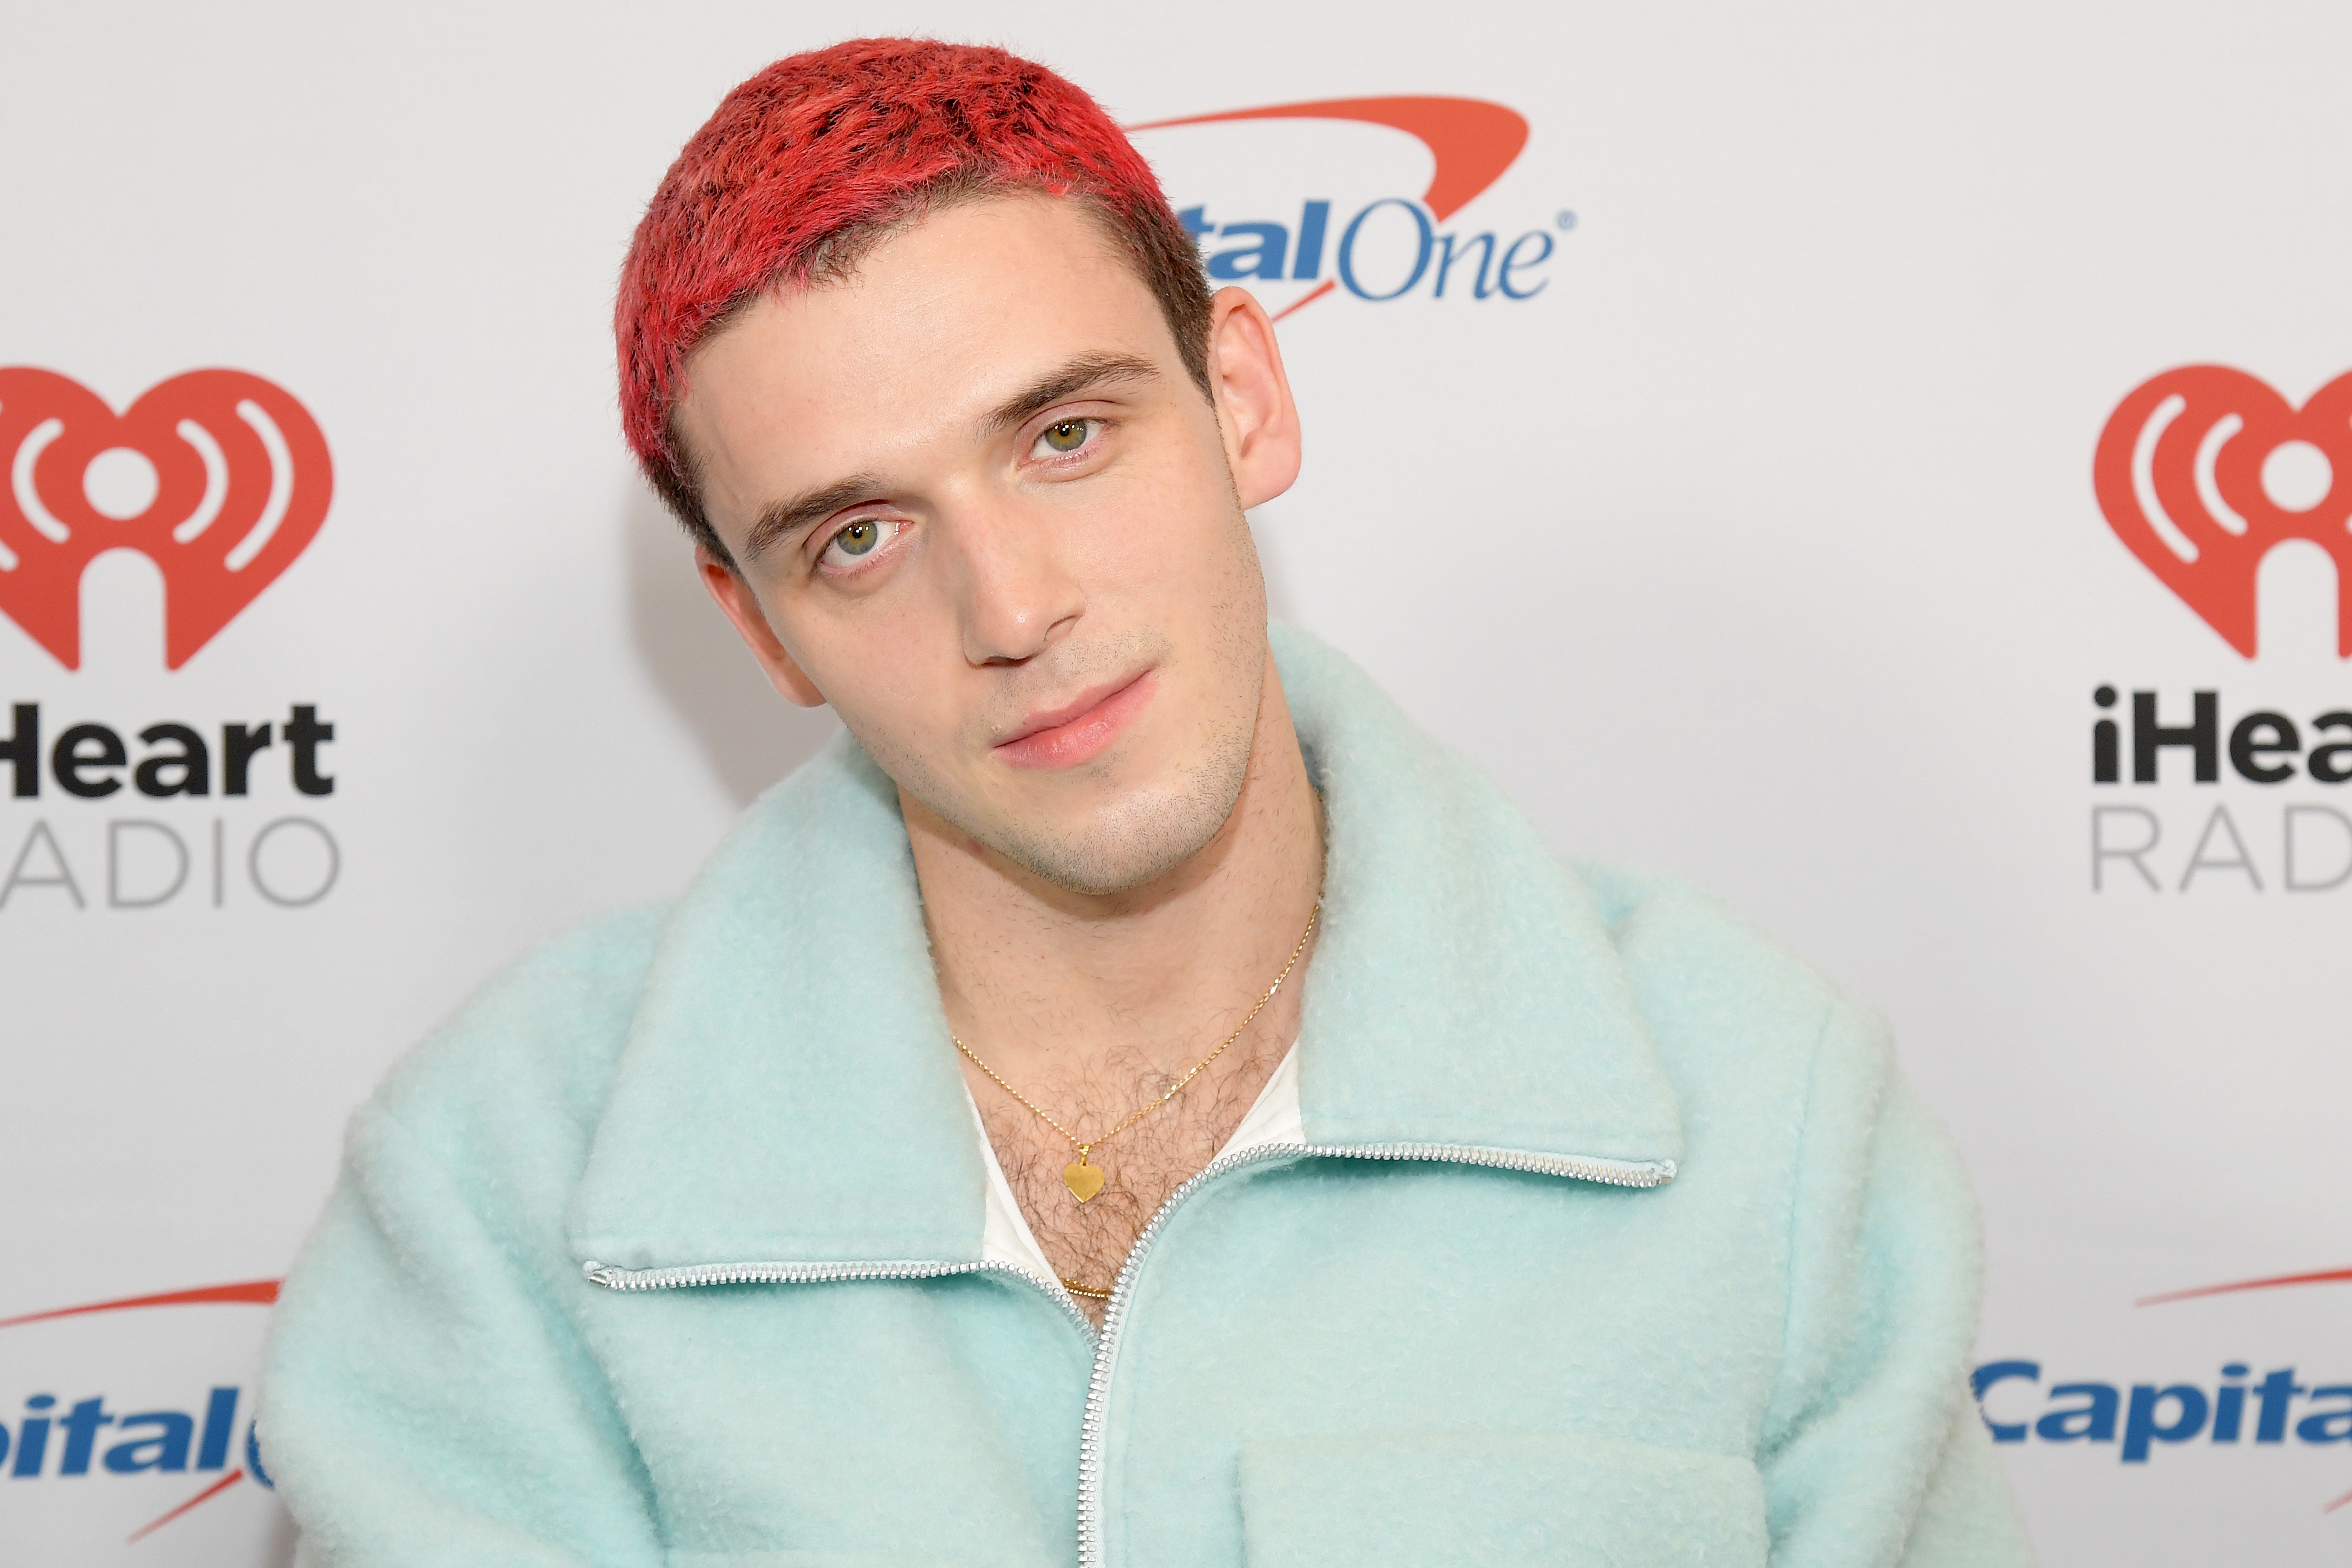 NEW YORK, NEW YORK - DECEMBER 13: Lauv arrives at iHeartRadio's Z100 Jingle Ball 2019 at Madison Square Garden on December 13, 2019 in New York City. (Photo by Michael Loccisano/Getty Images) (Foto: Getty Images)